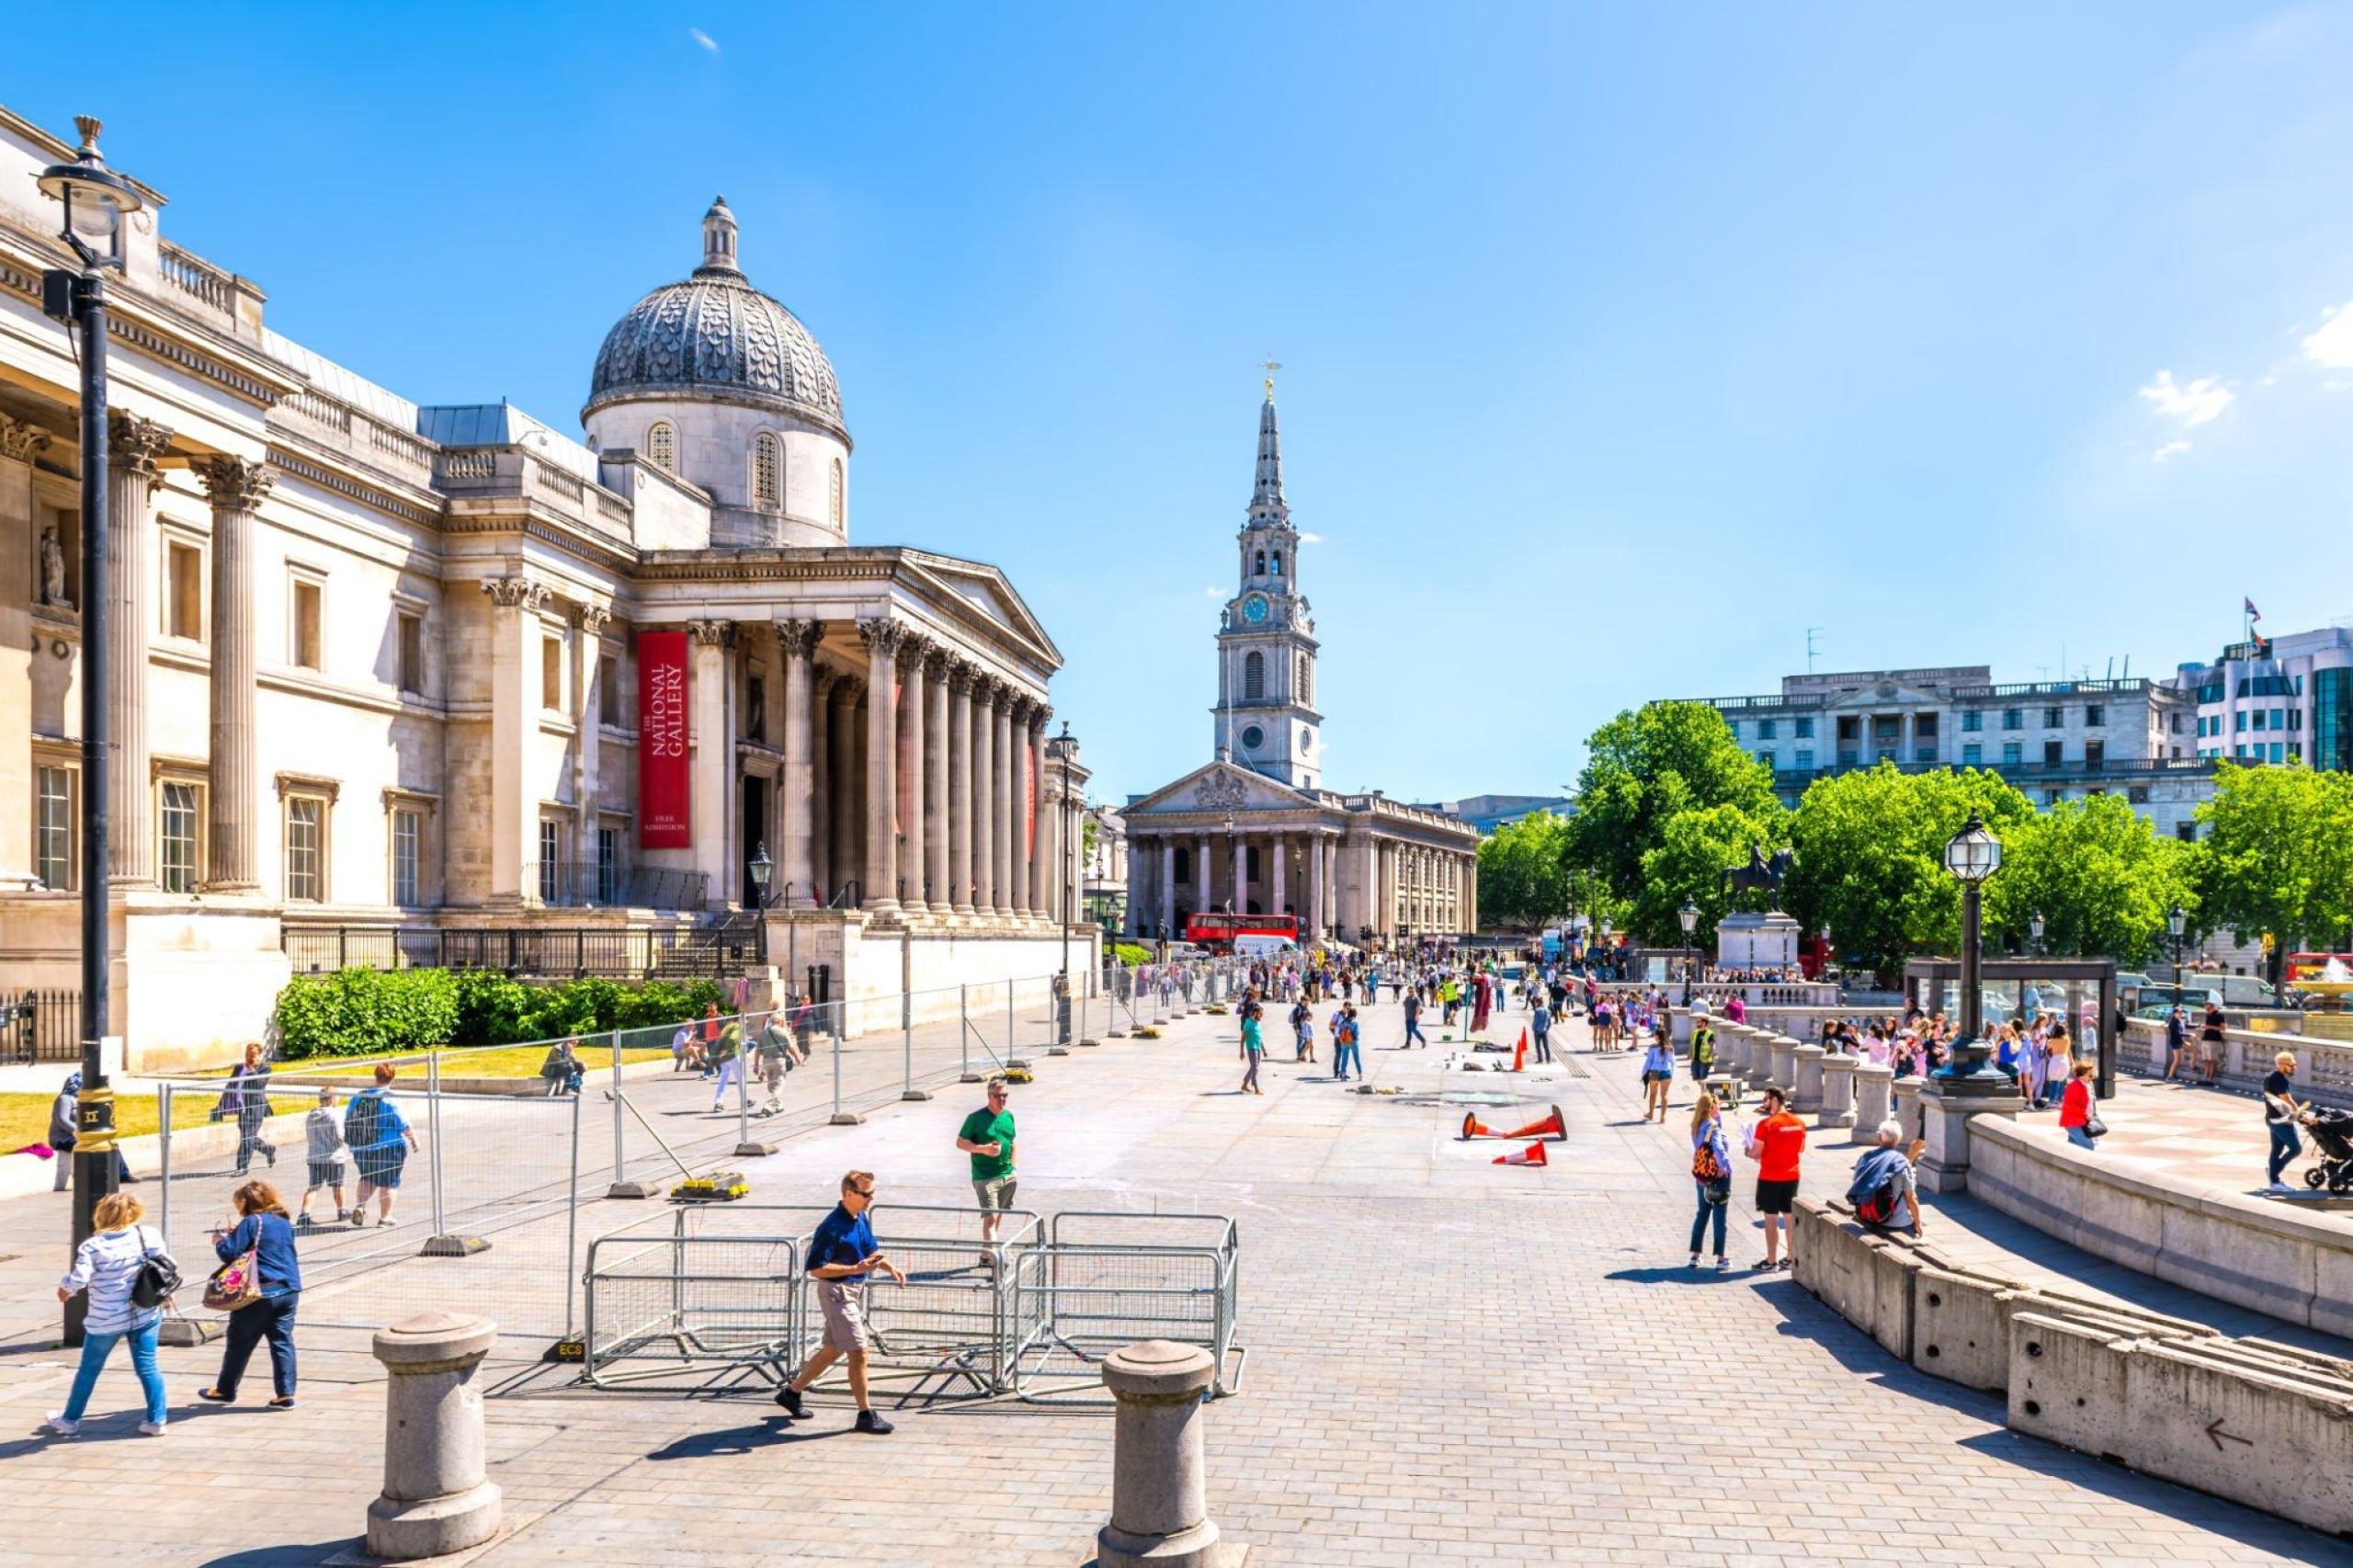 What Is Trafalgar Square Famous For